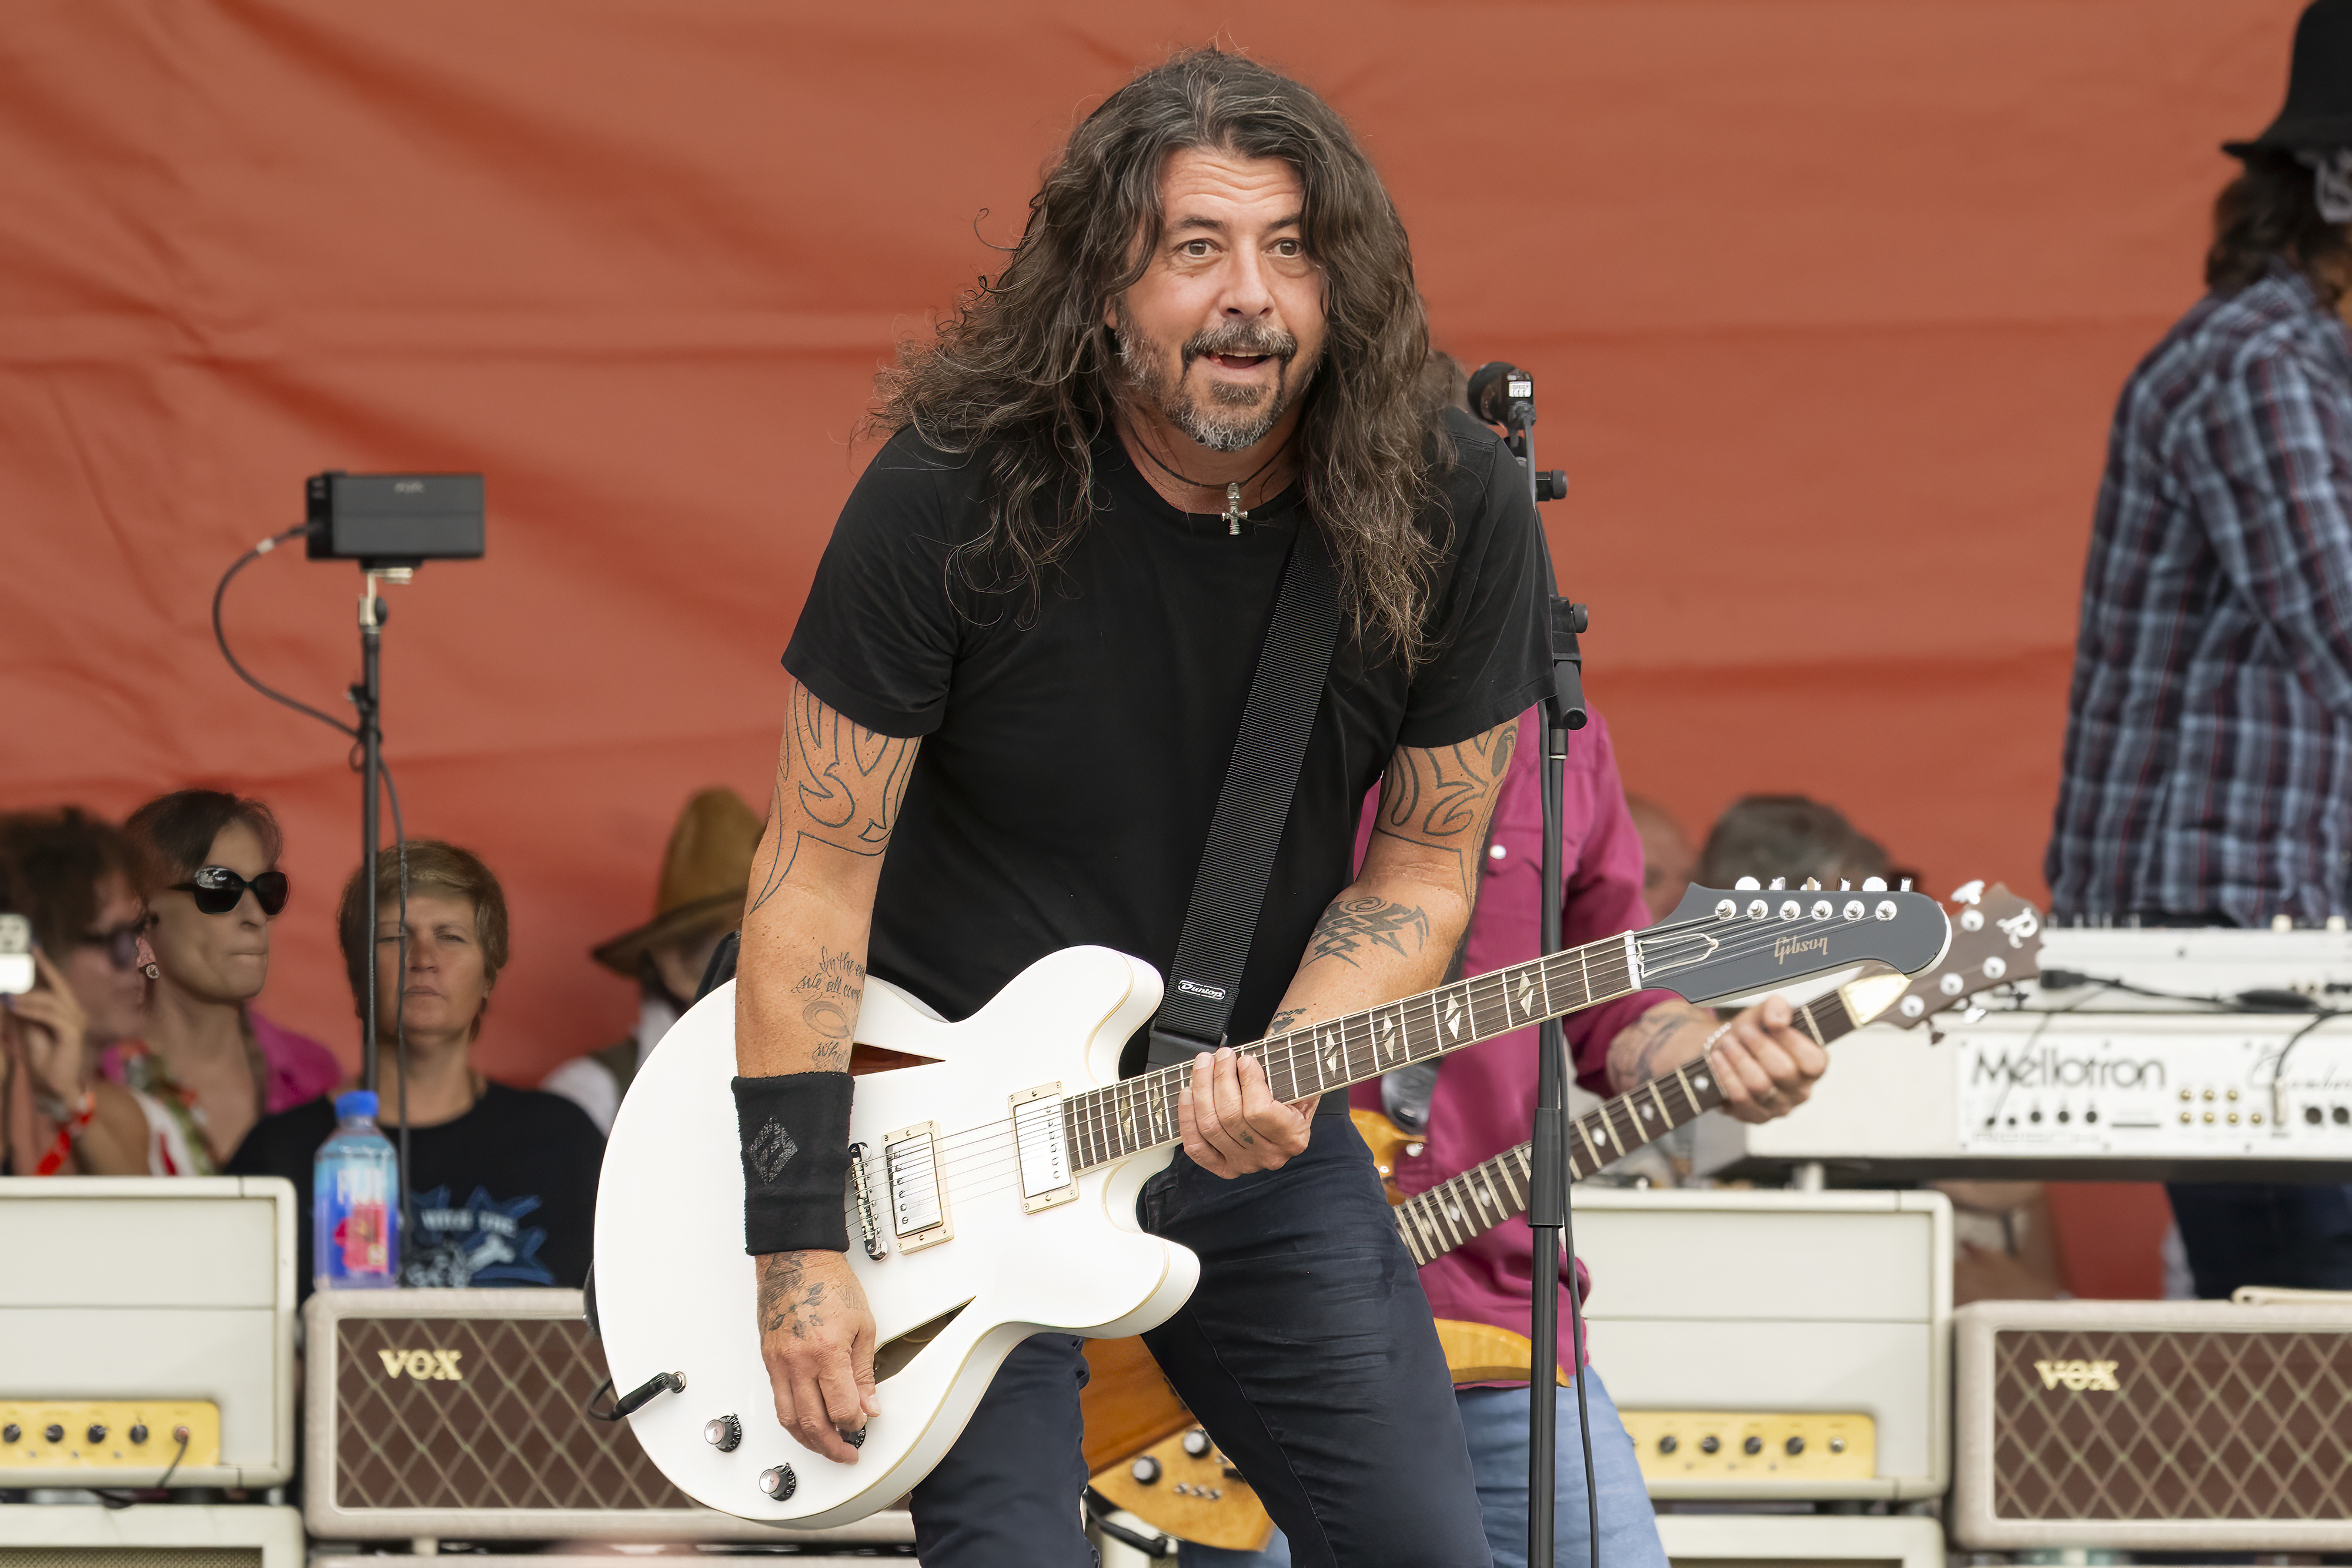 Dave Grohl on stage performing with a white electric guitar. Other band members and equipment visible in the background